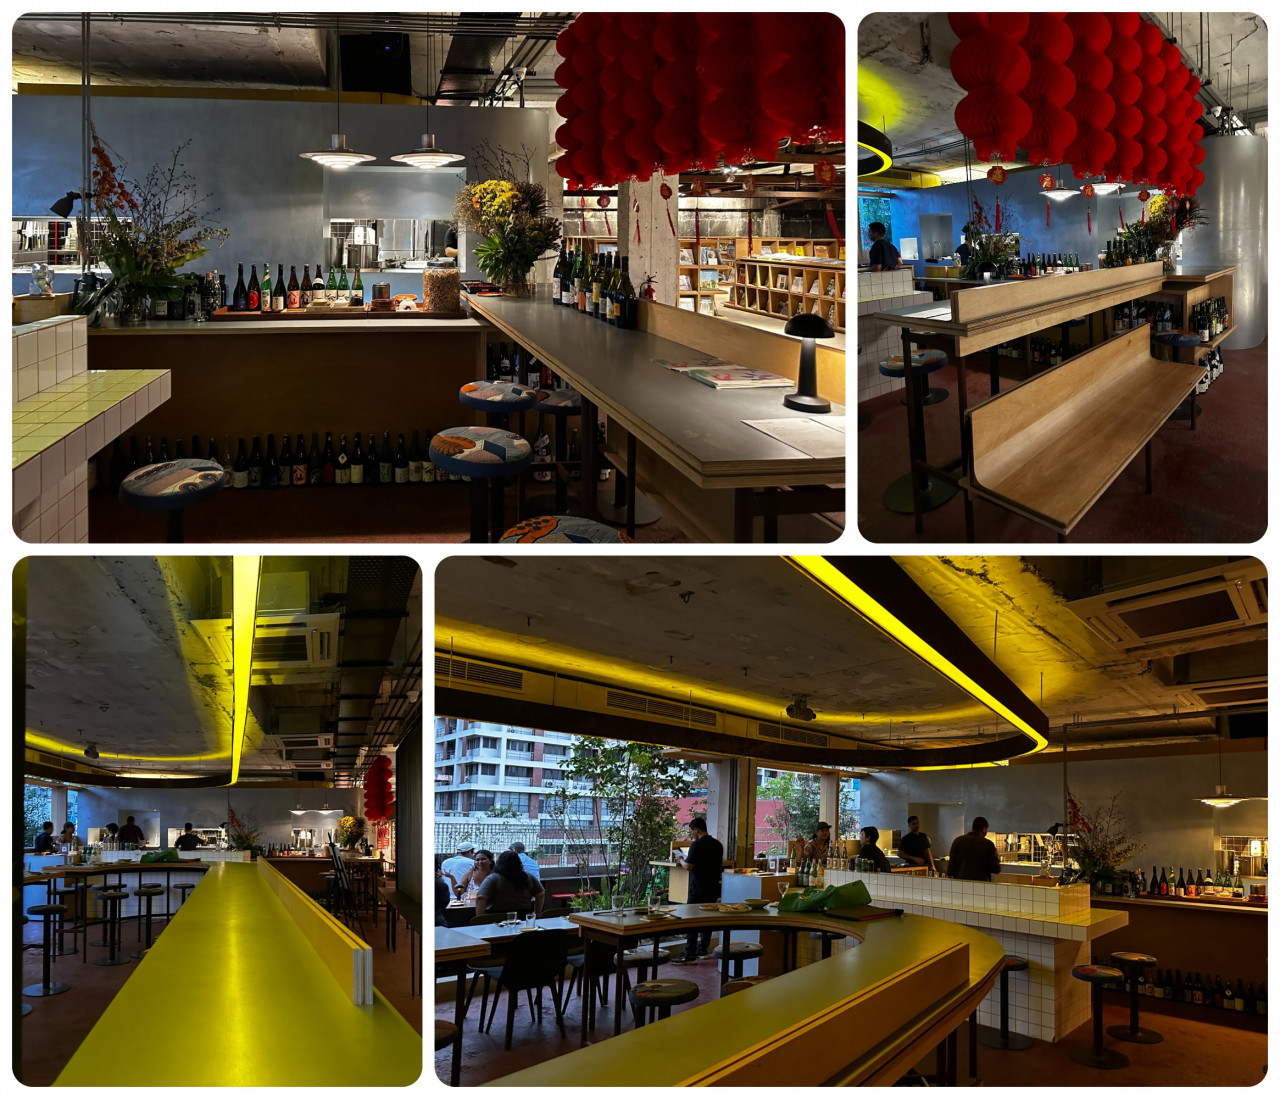 Shhhbuuuleee has a very postmodern look that a lot of newer restaurants go for, though the lighting and arrangement of the countertops give it its unique look. – Haikal Fernandez pics